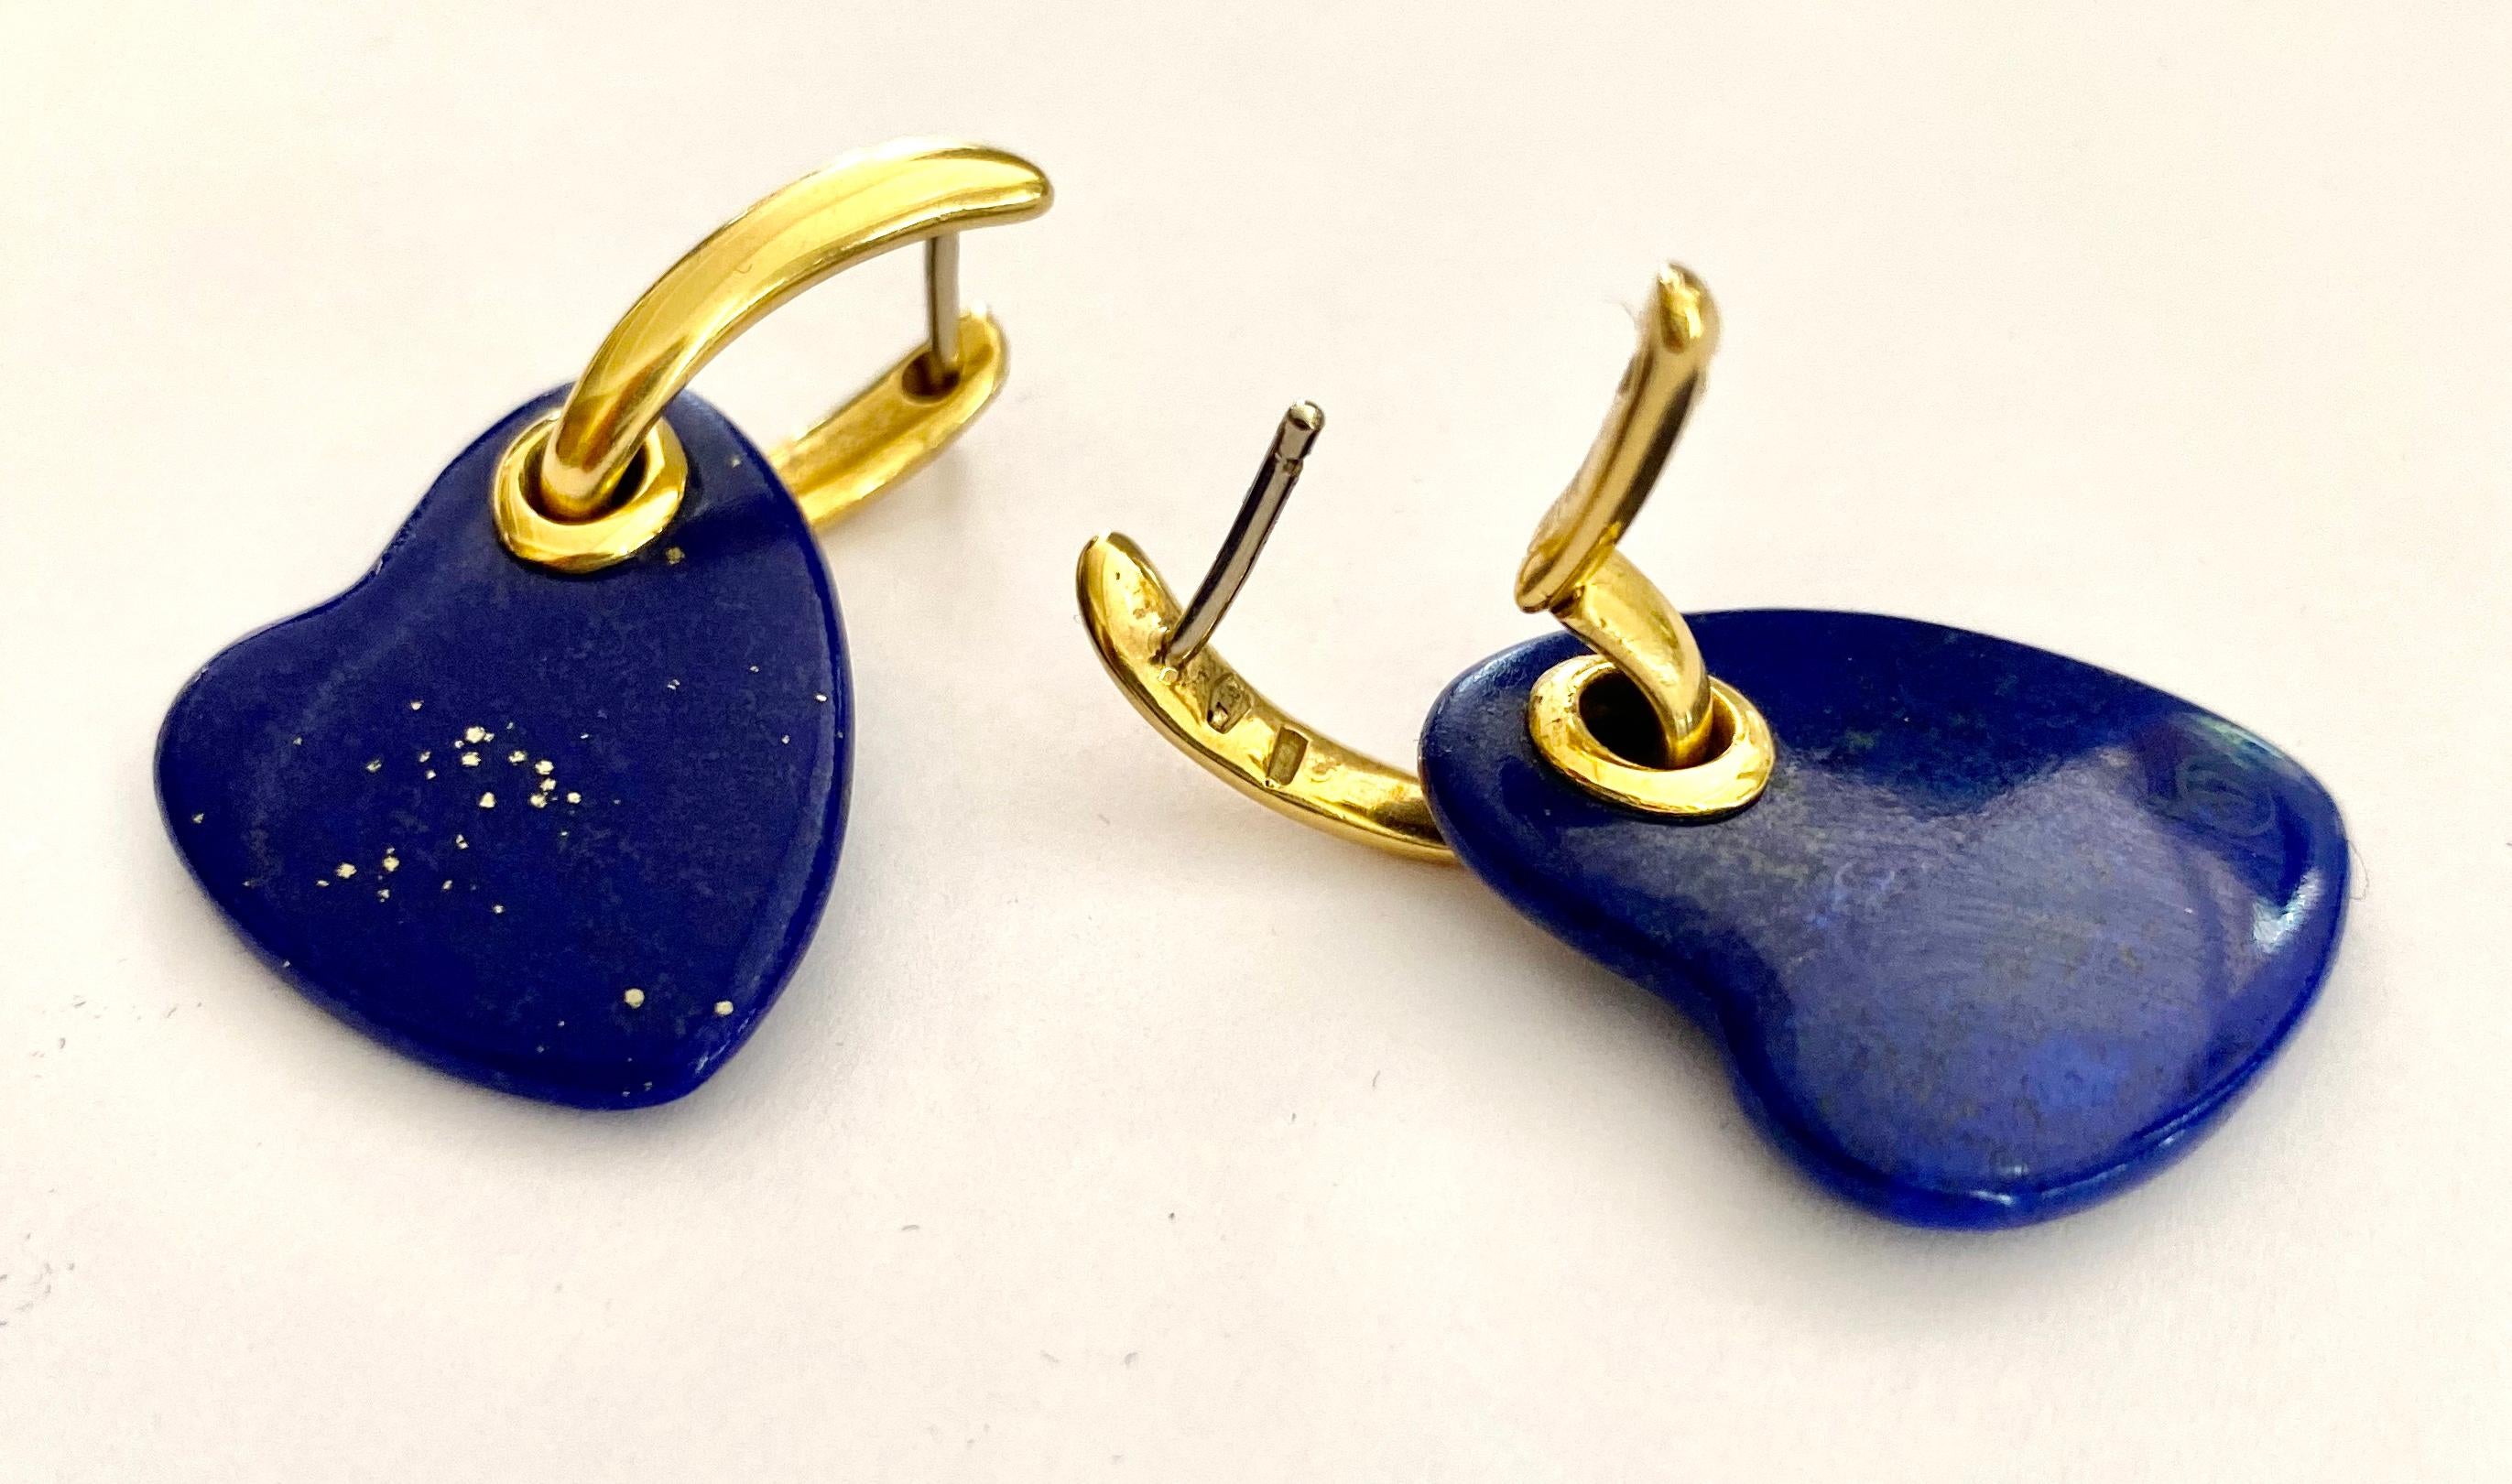 One 18K. Yellow Gold Pair of earrings  set with 2 Heart Cabuchon Cut matural Lapis Lazuli.
Signed: Rinaldo Gavello  Millano ca 1980   (including original Box)
Weight: 12.57 gram  (totaal)
Italy 1980